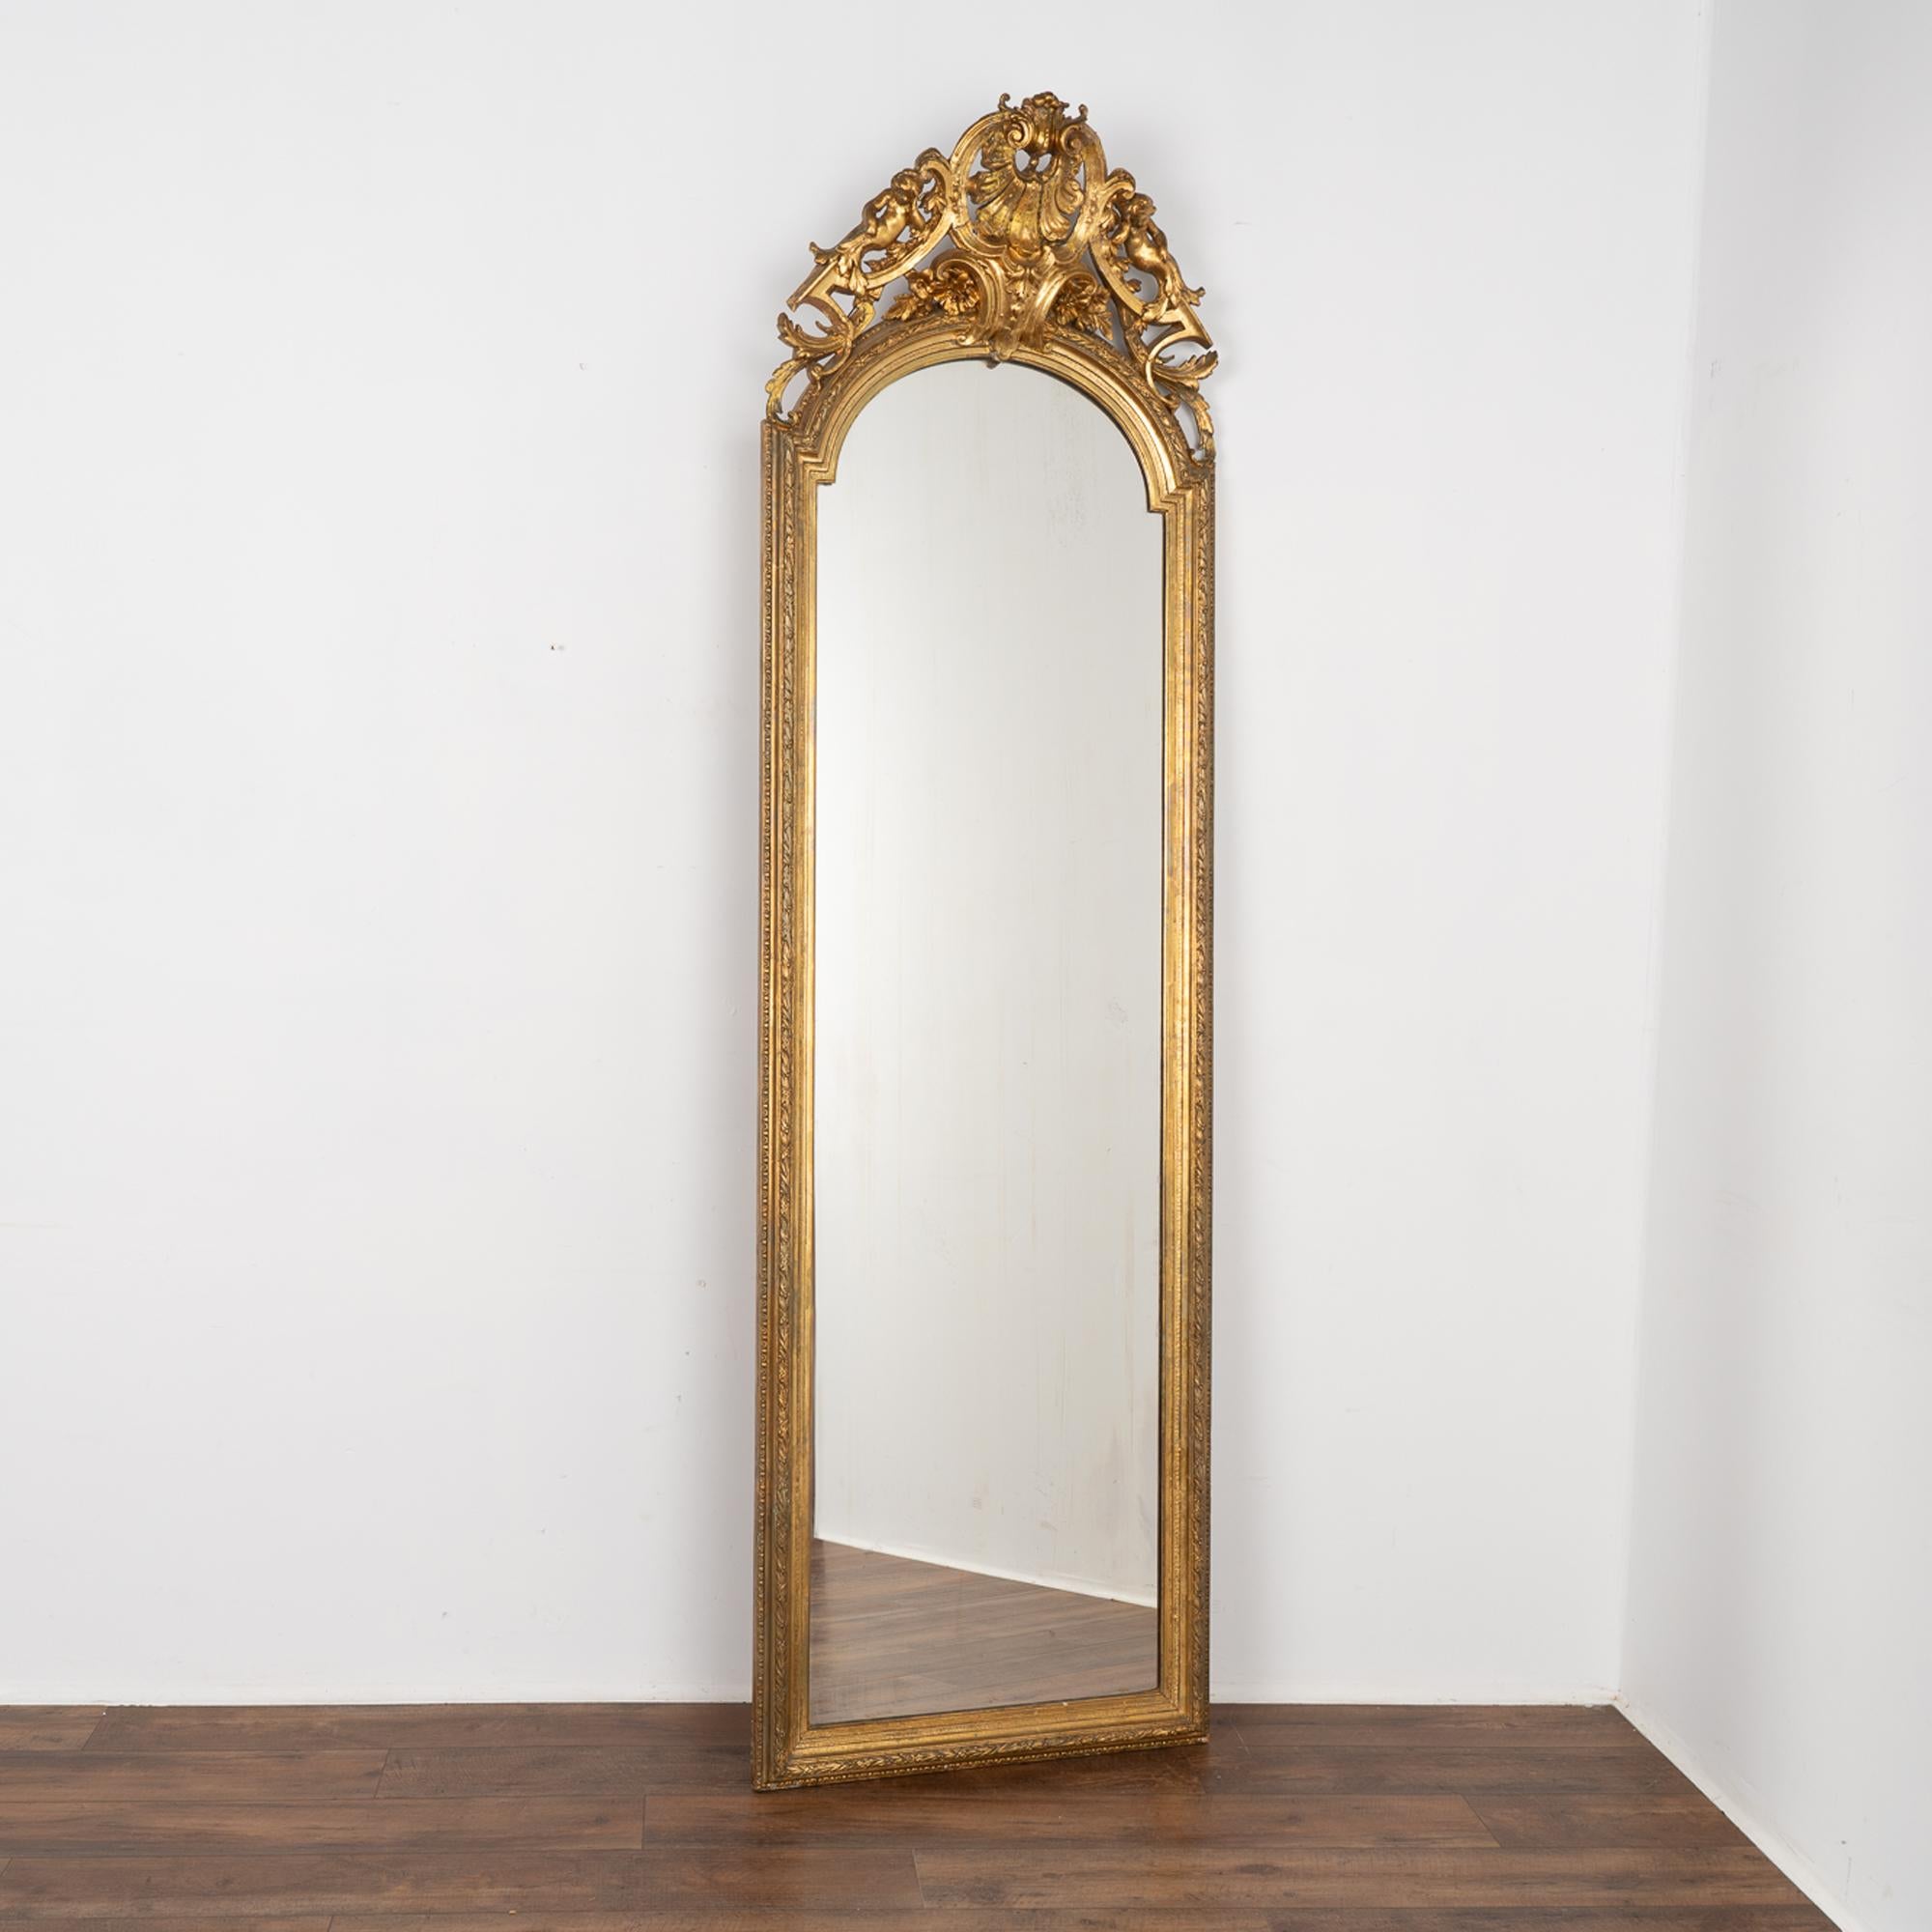 This stunning gold gilt mirror is over 8' tall and is crowned with carved flowers, two putti, leaves and flourishes.
There is expected age-related wear as seen where the gilt has been worn off, faded, chipped or cracked; some old repairs.
This tall